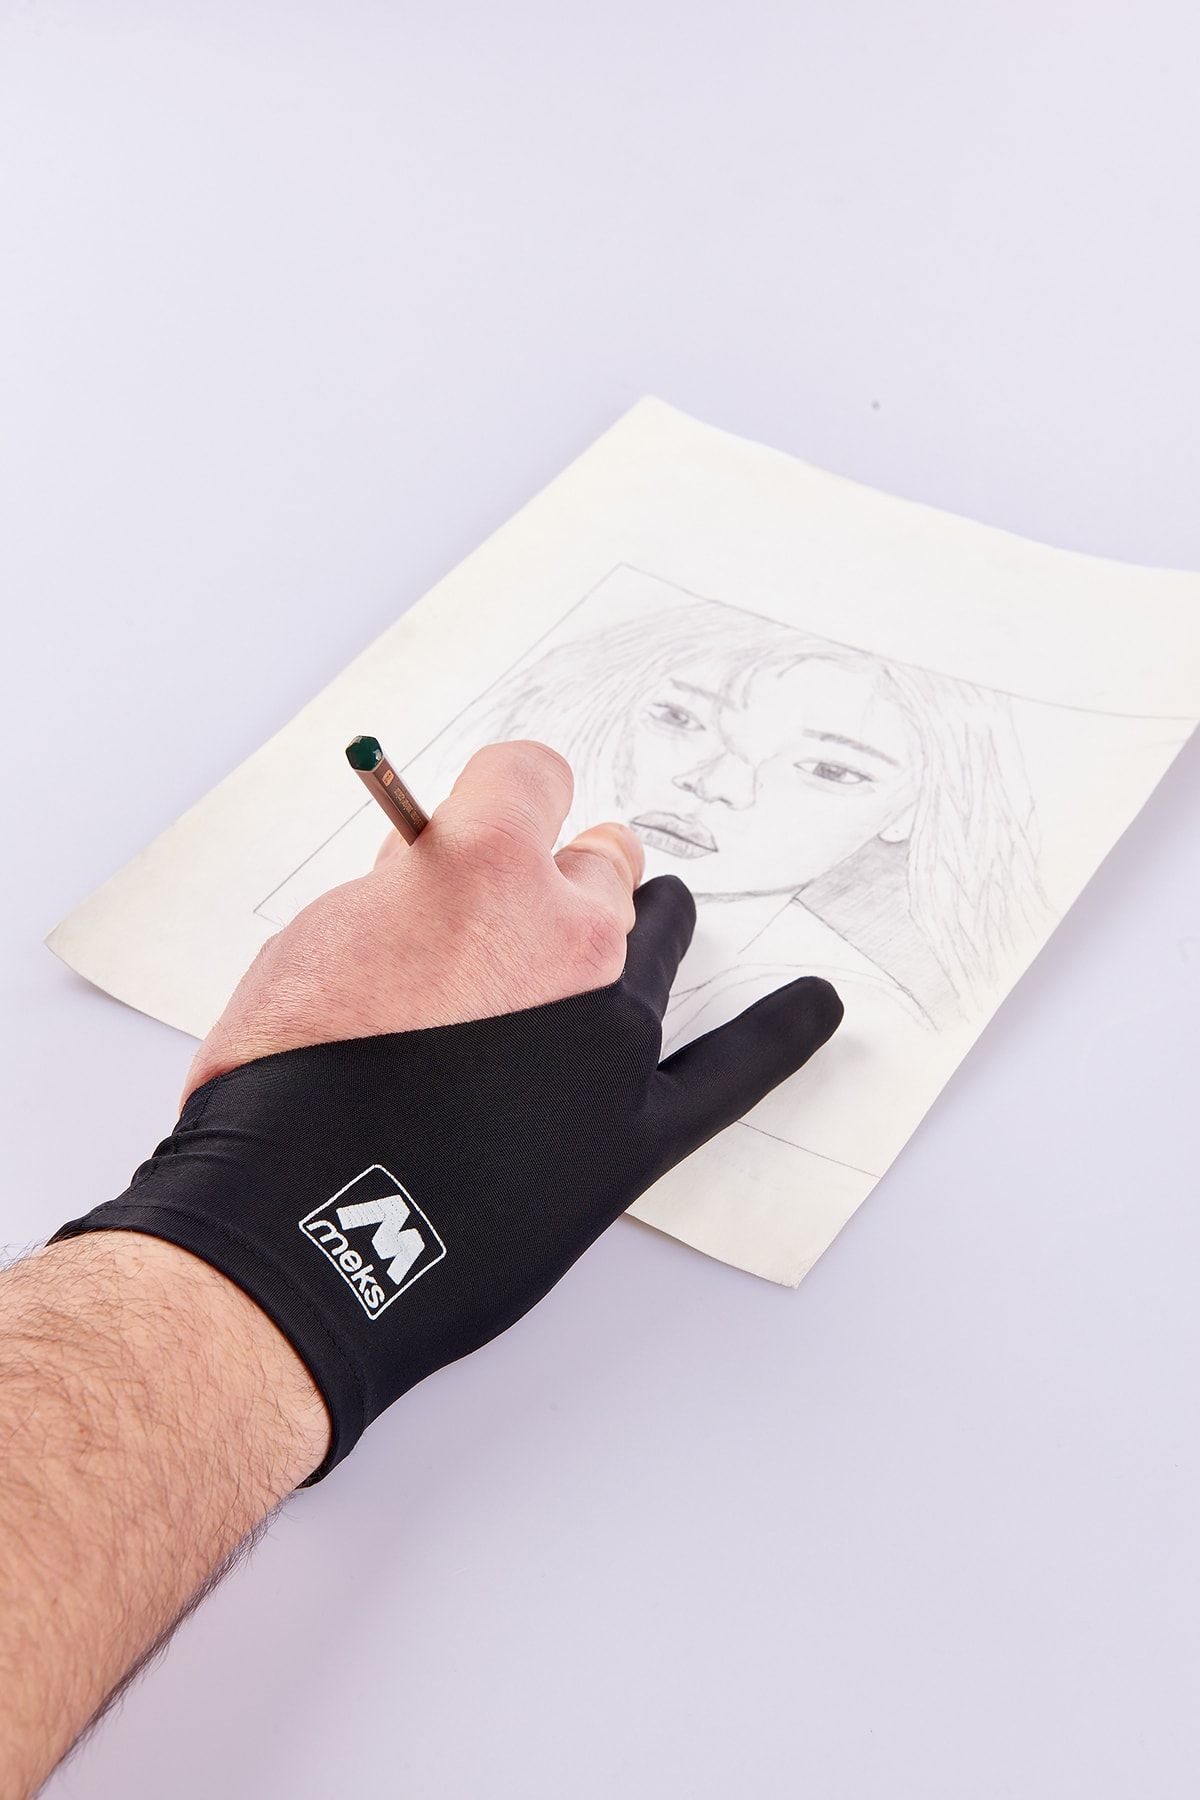 MEKs Graphic Tablet Drawing Glove For Art And Education Small Size -  Trendyol